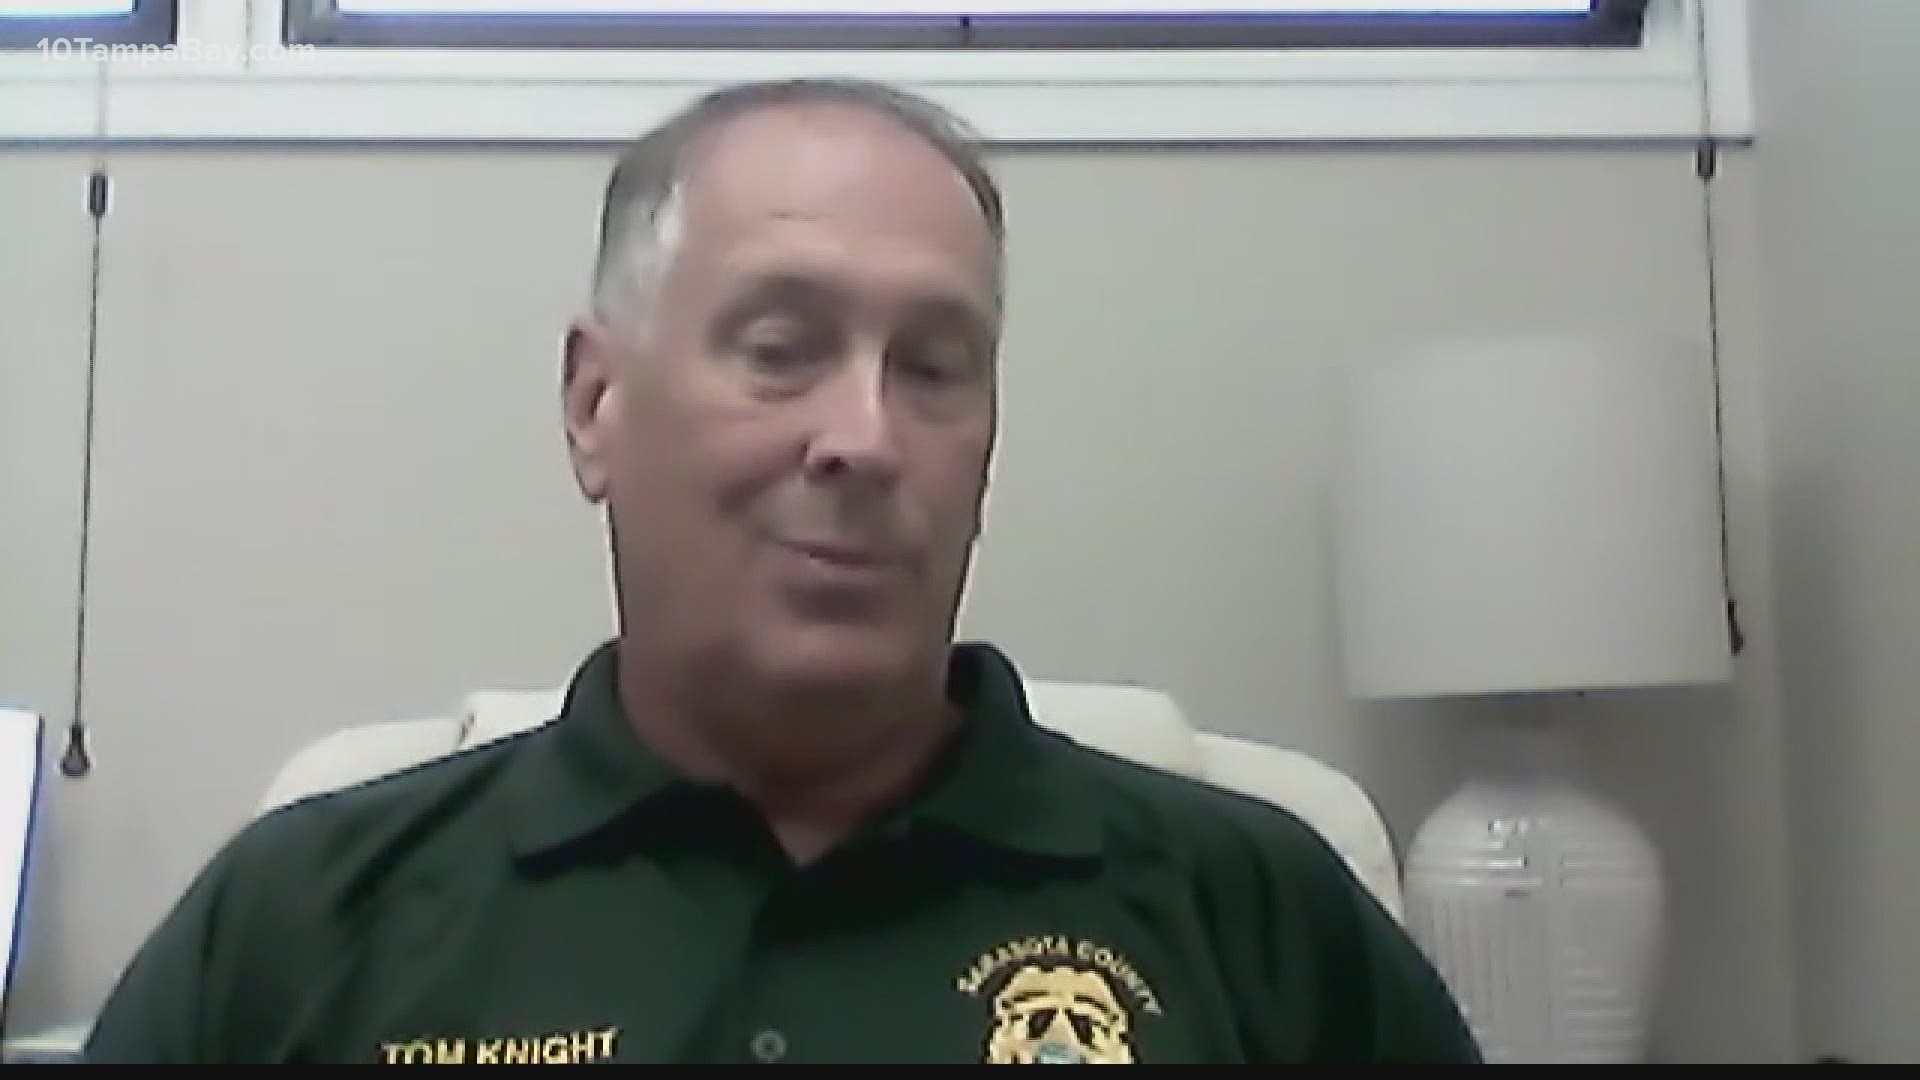 Previously two other Tampa Bay area county sheriff's have also commented on the topic.